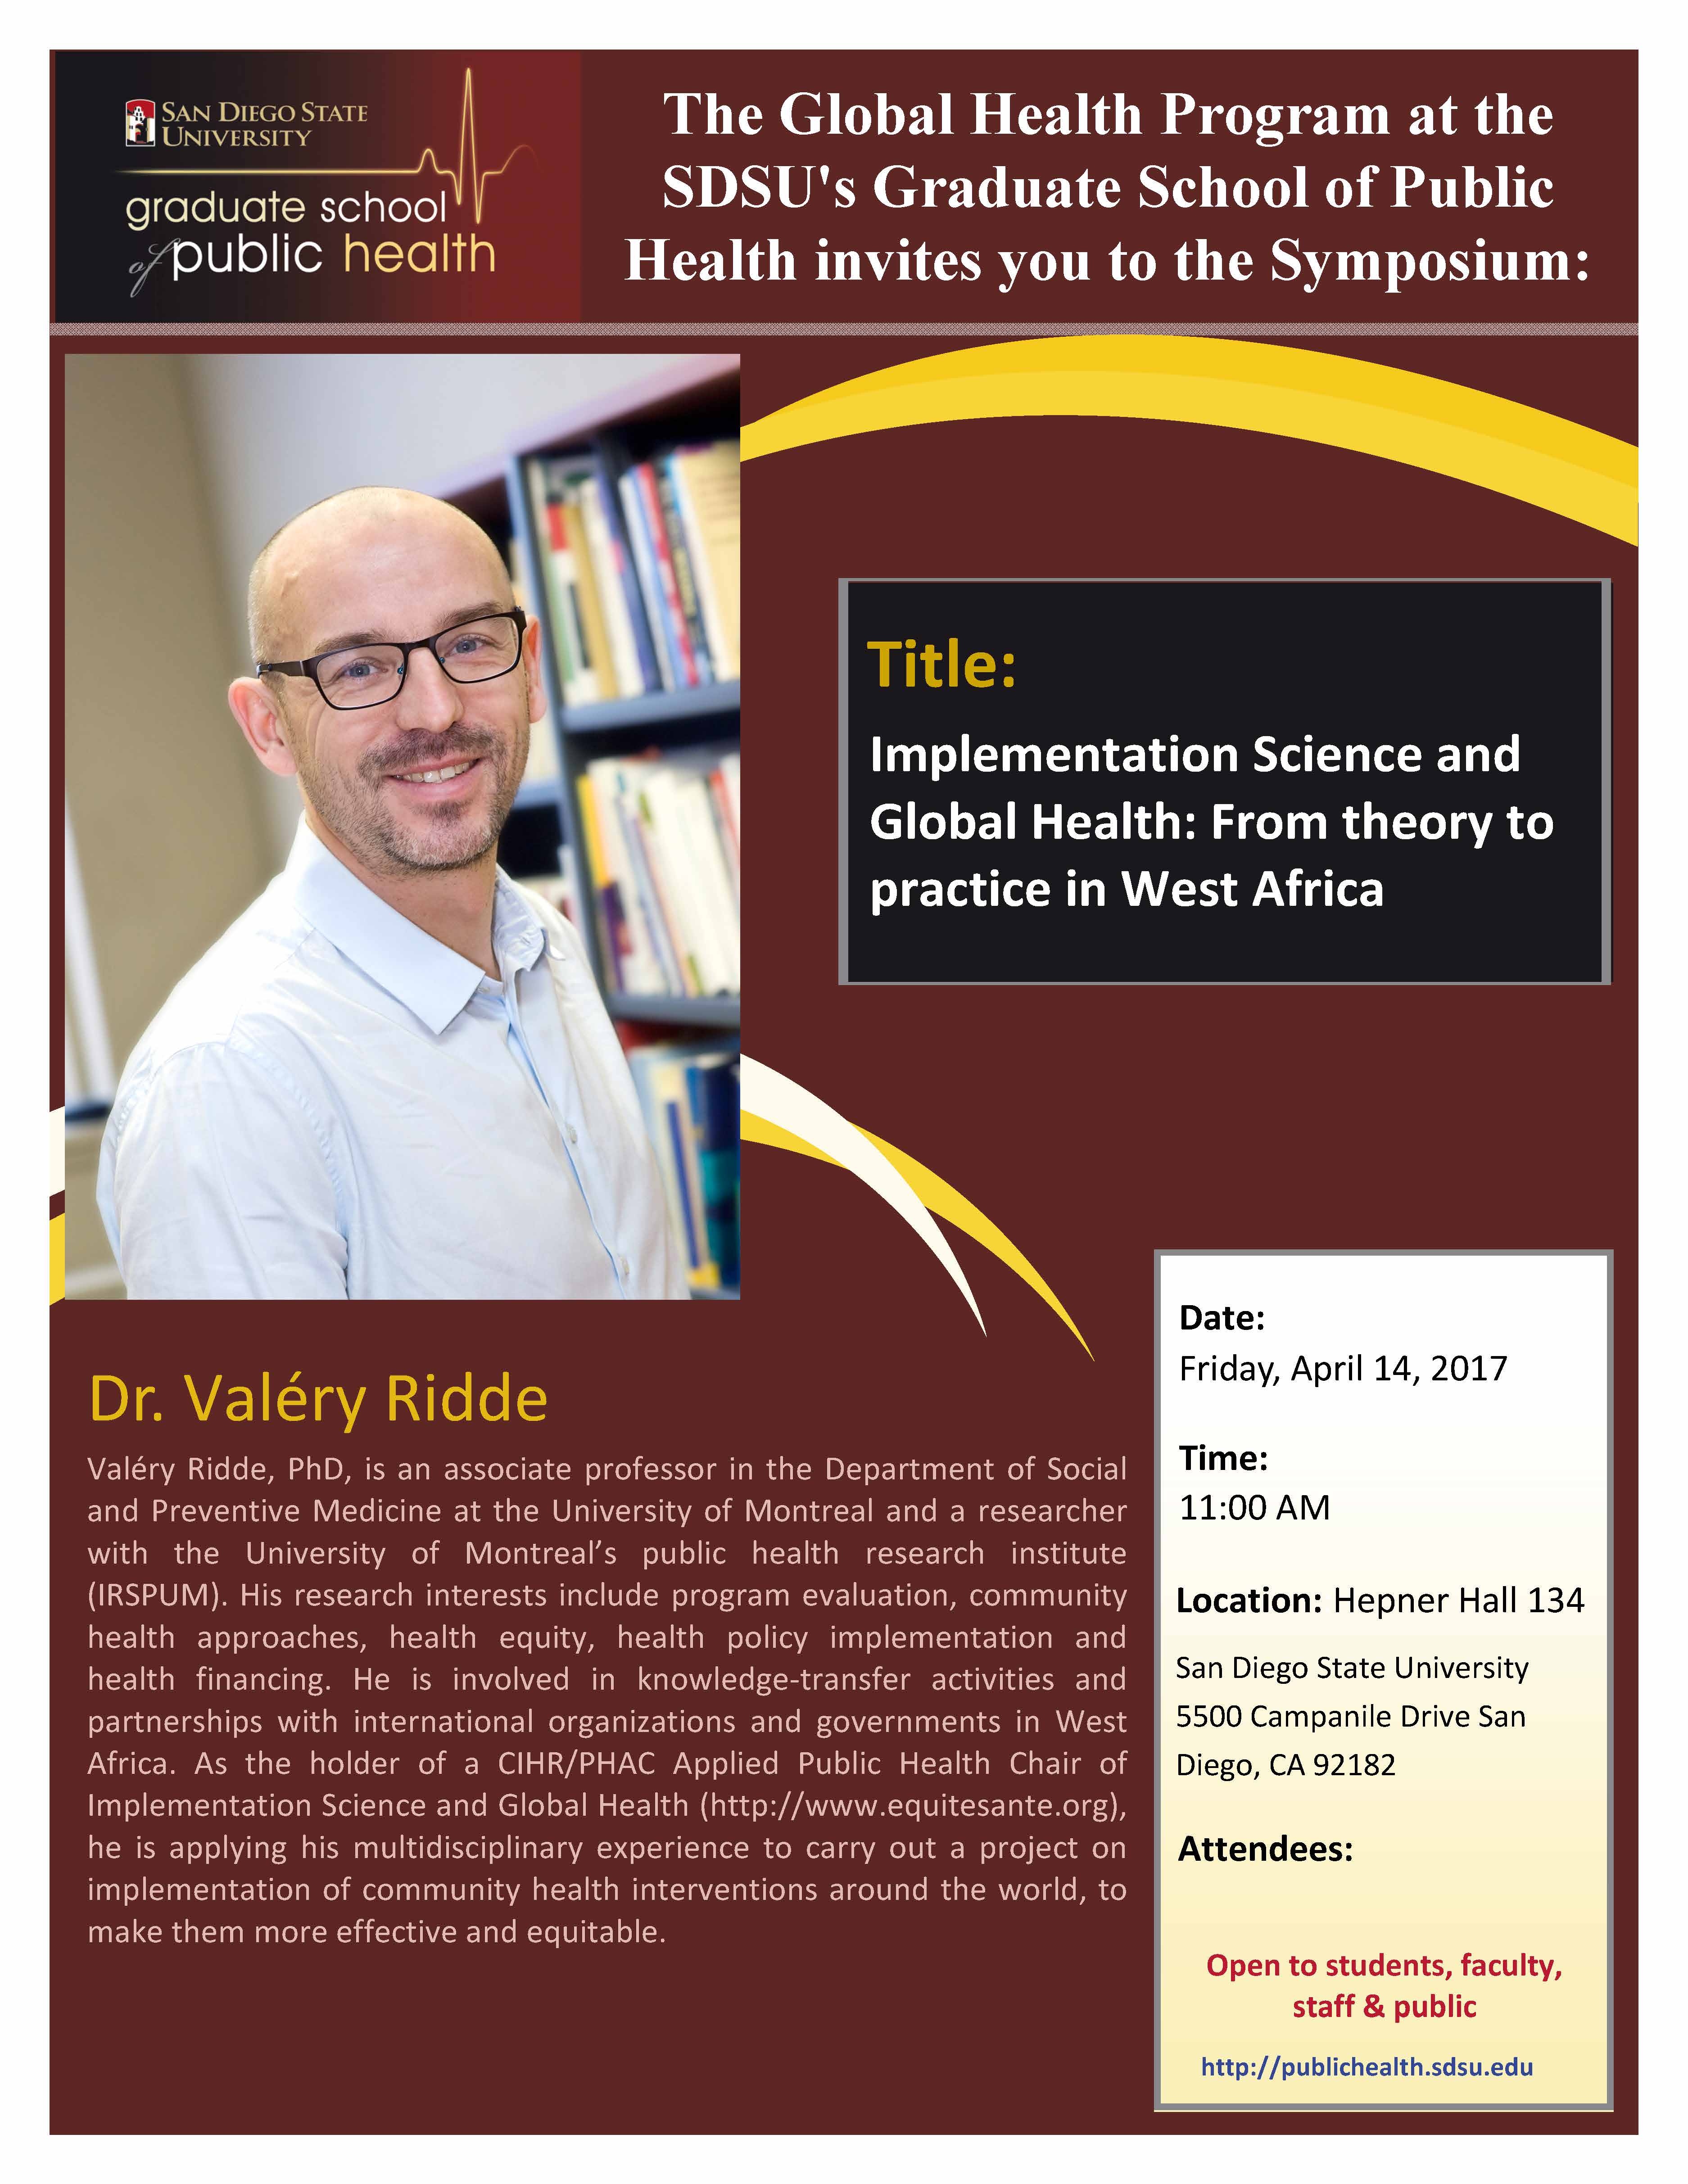  Implementation Science and global health in west africa Symposium April 14 Flyer